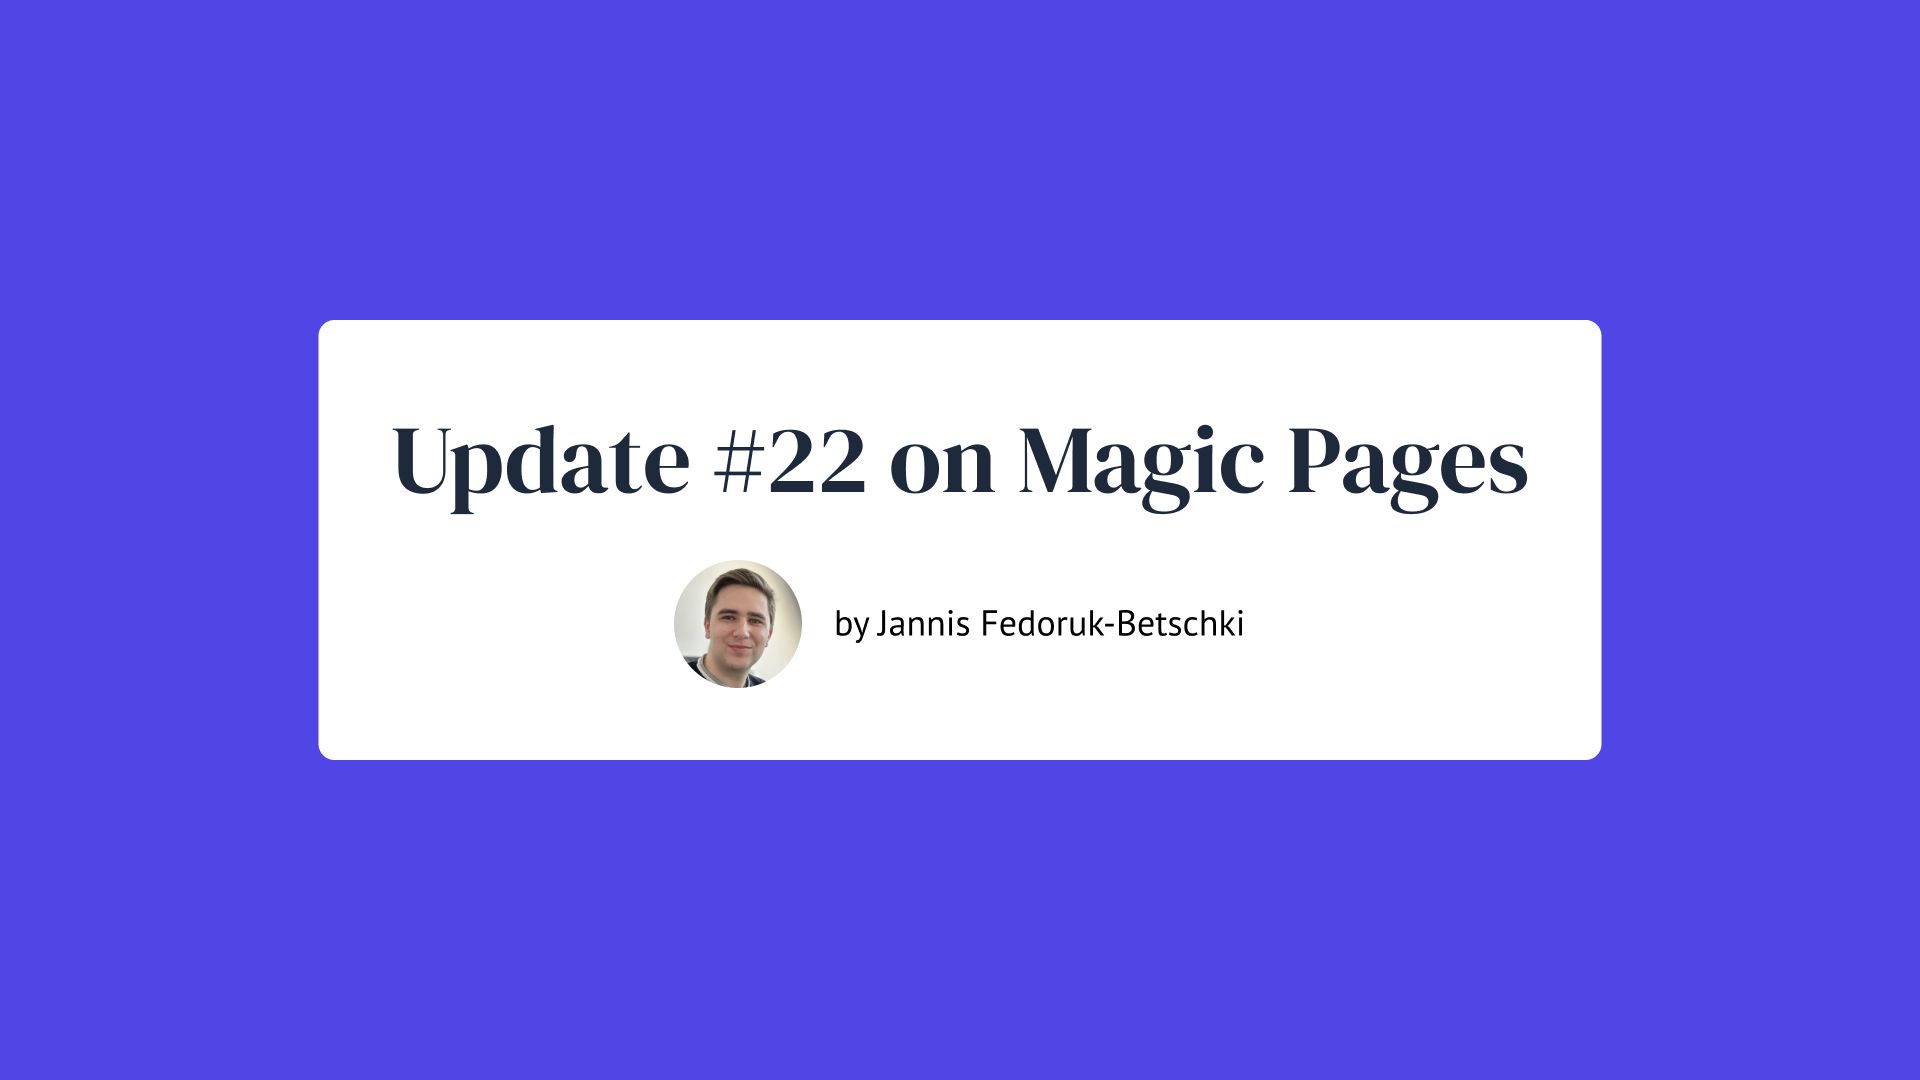 Update #22 on Magic Pages by Jannis Fedoruk-Betschki